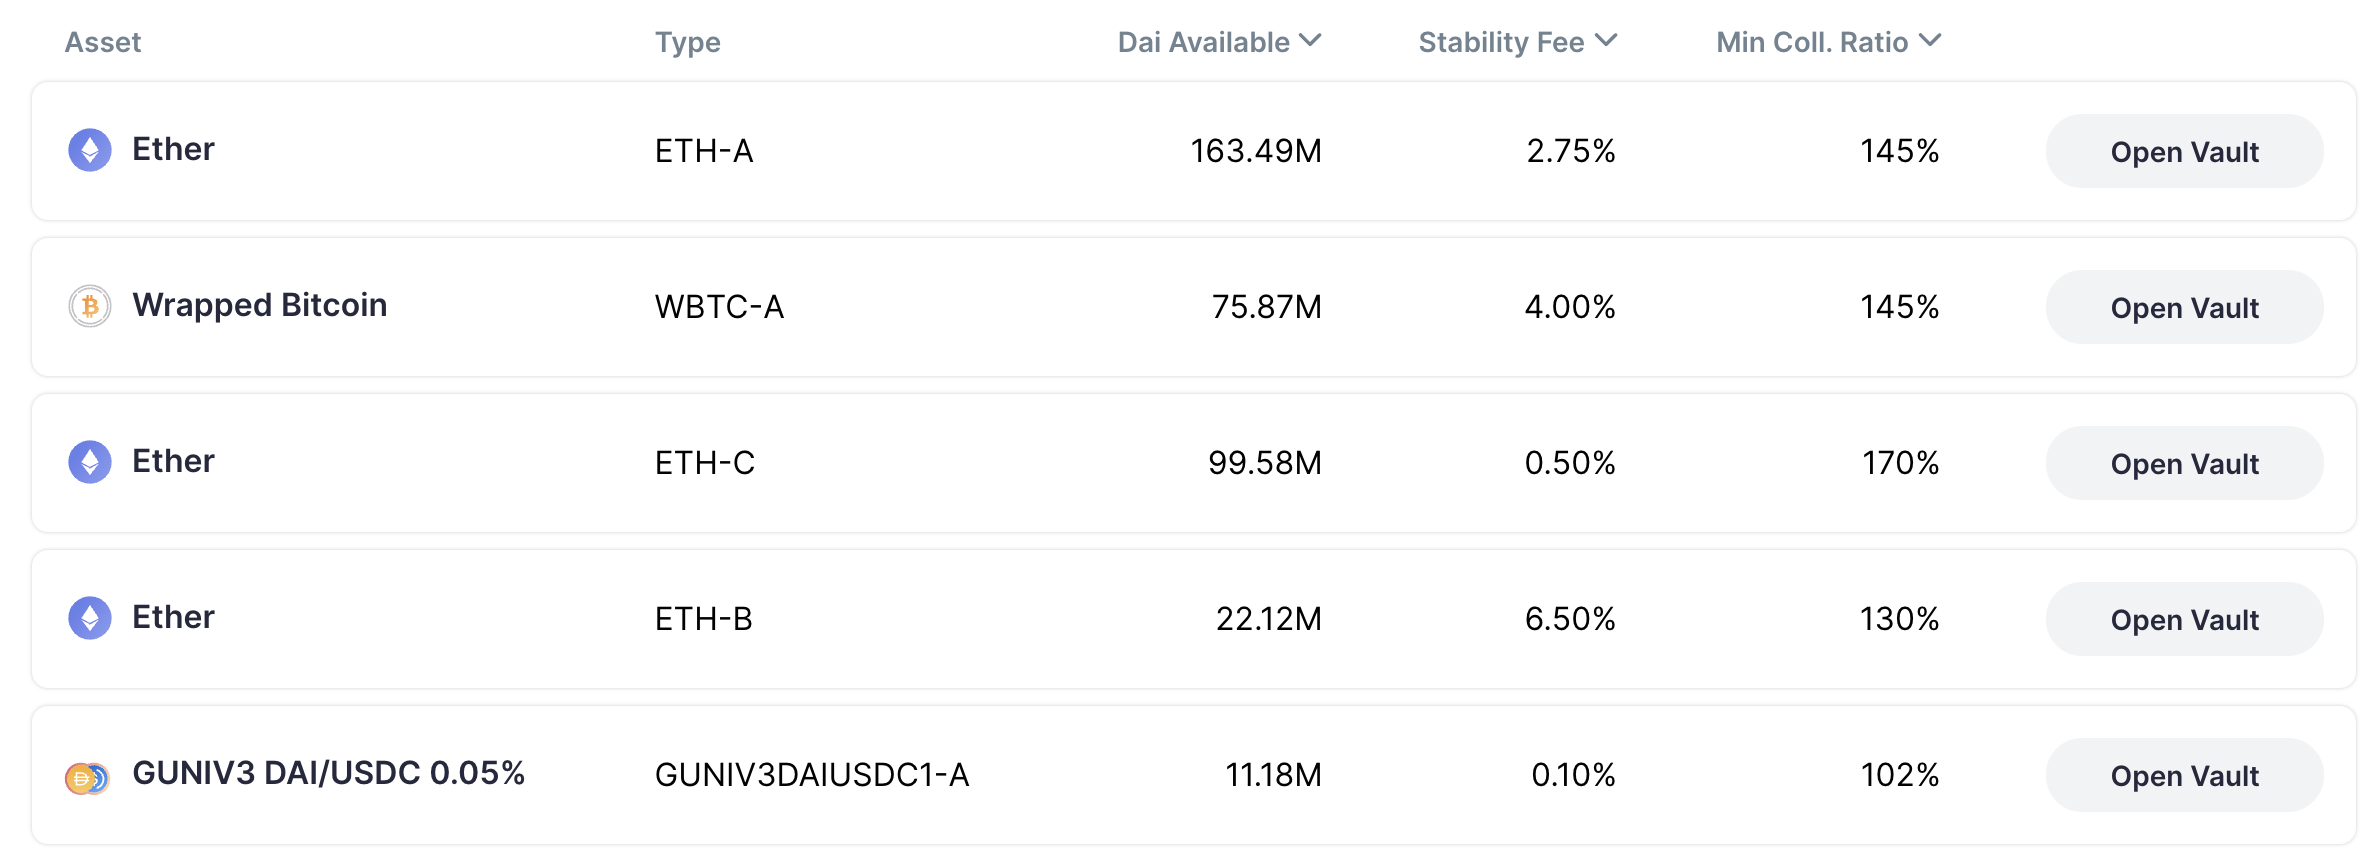 Different borrowing options on the DeFi platform Oasis.